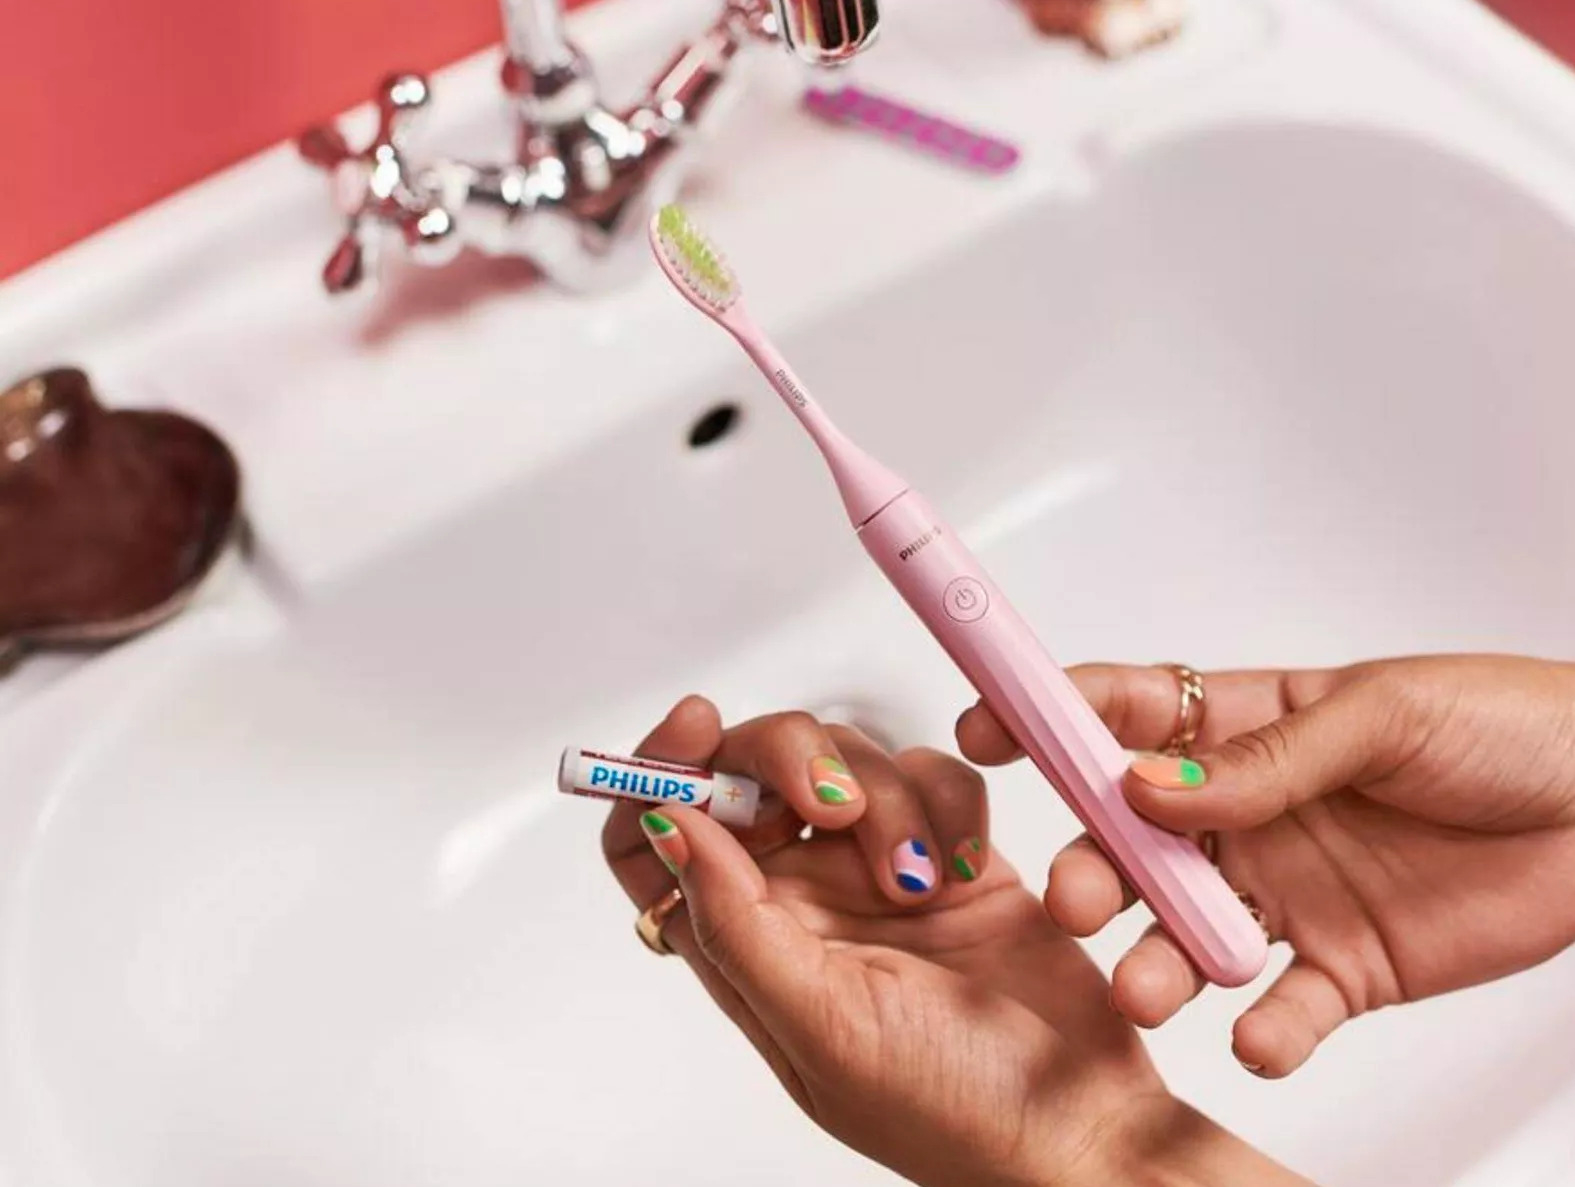 The toothbrush in pink